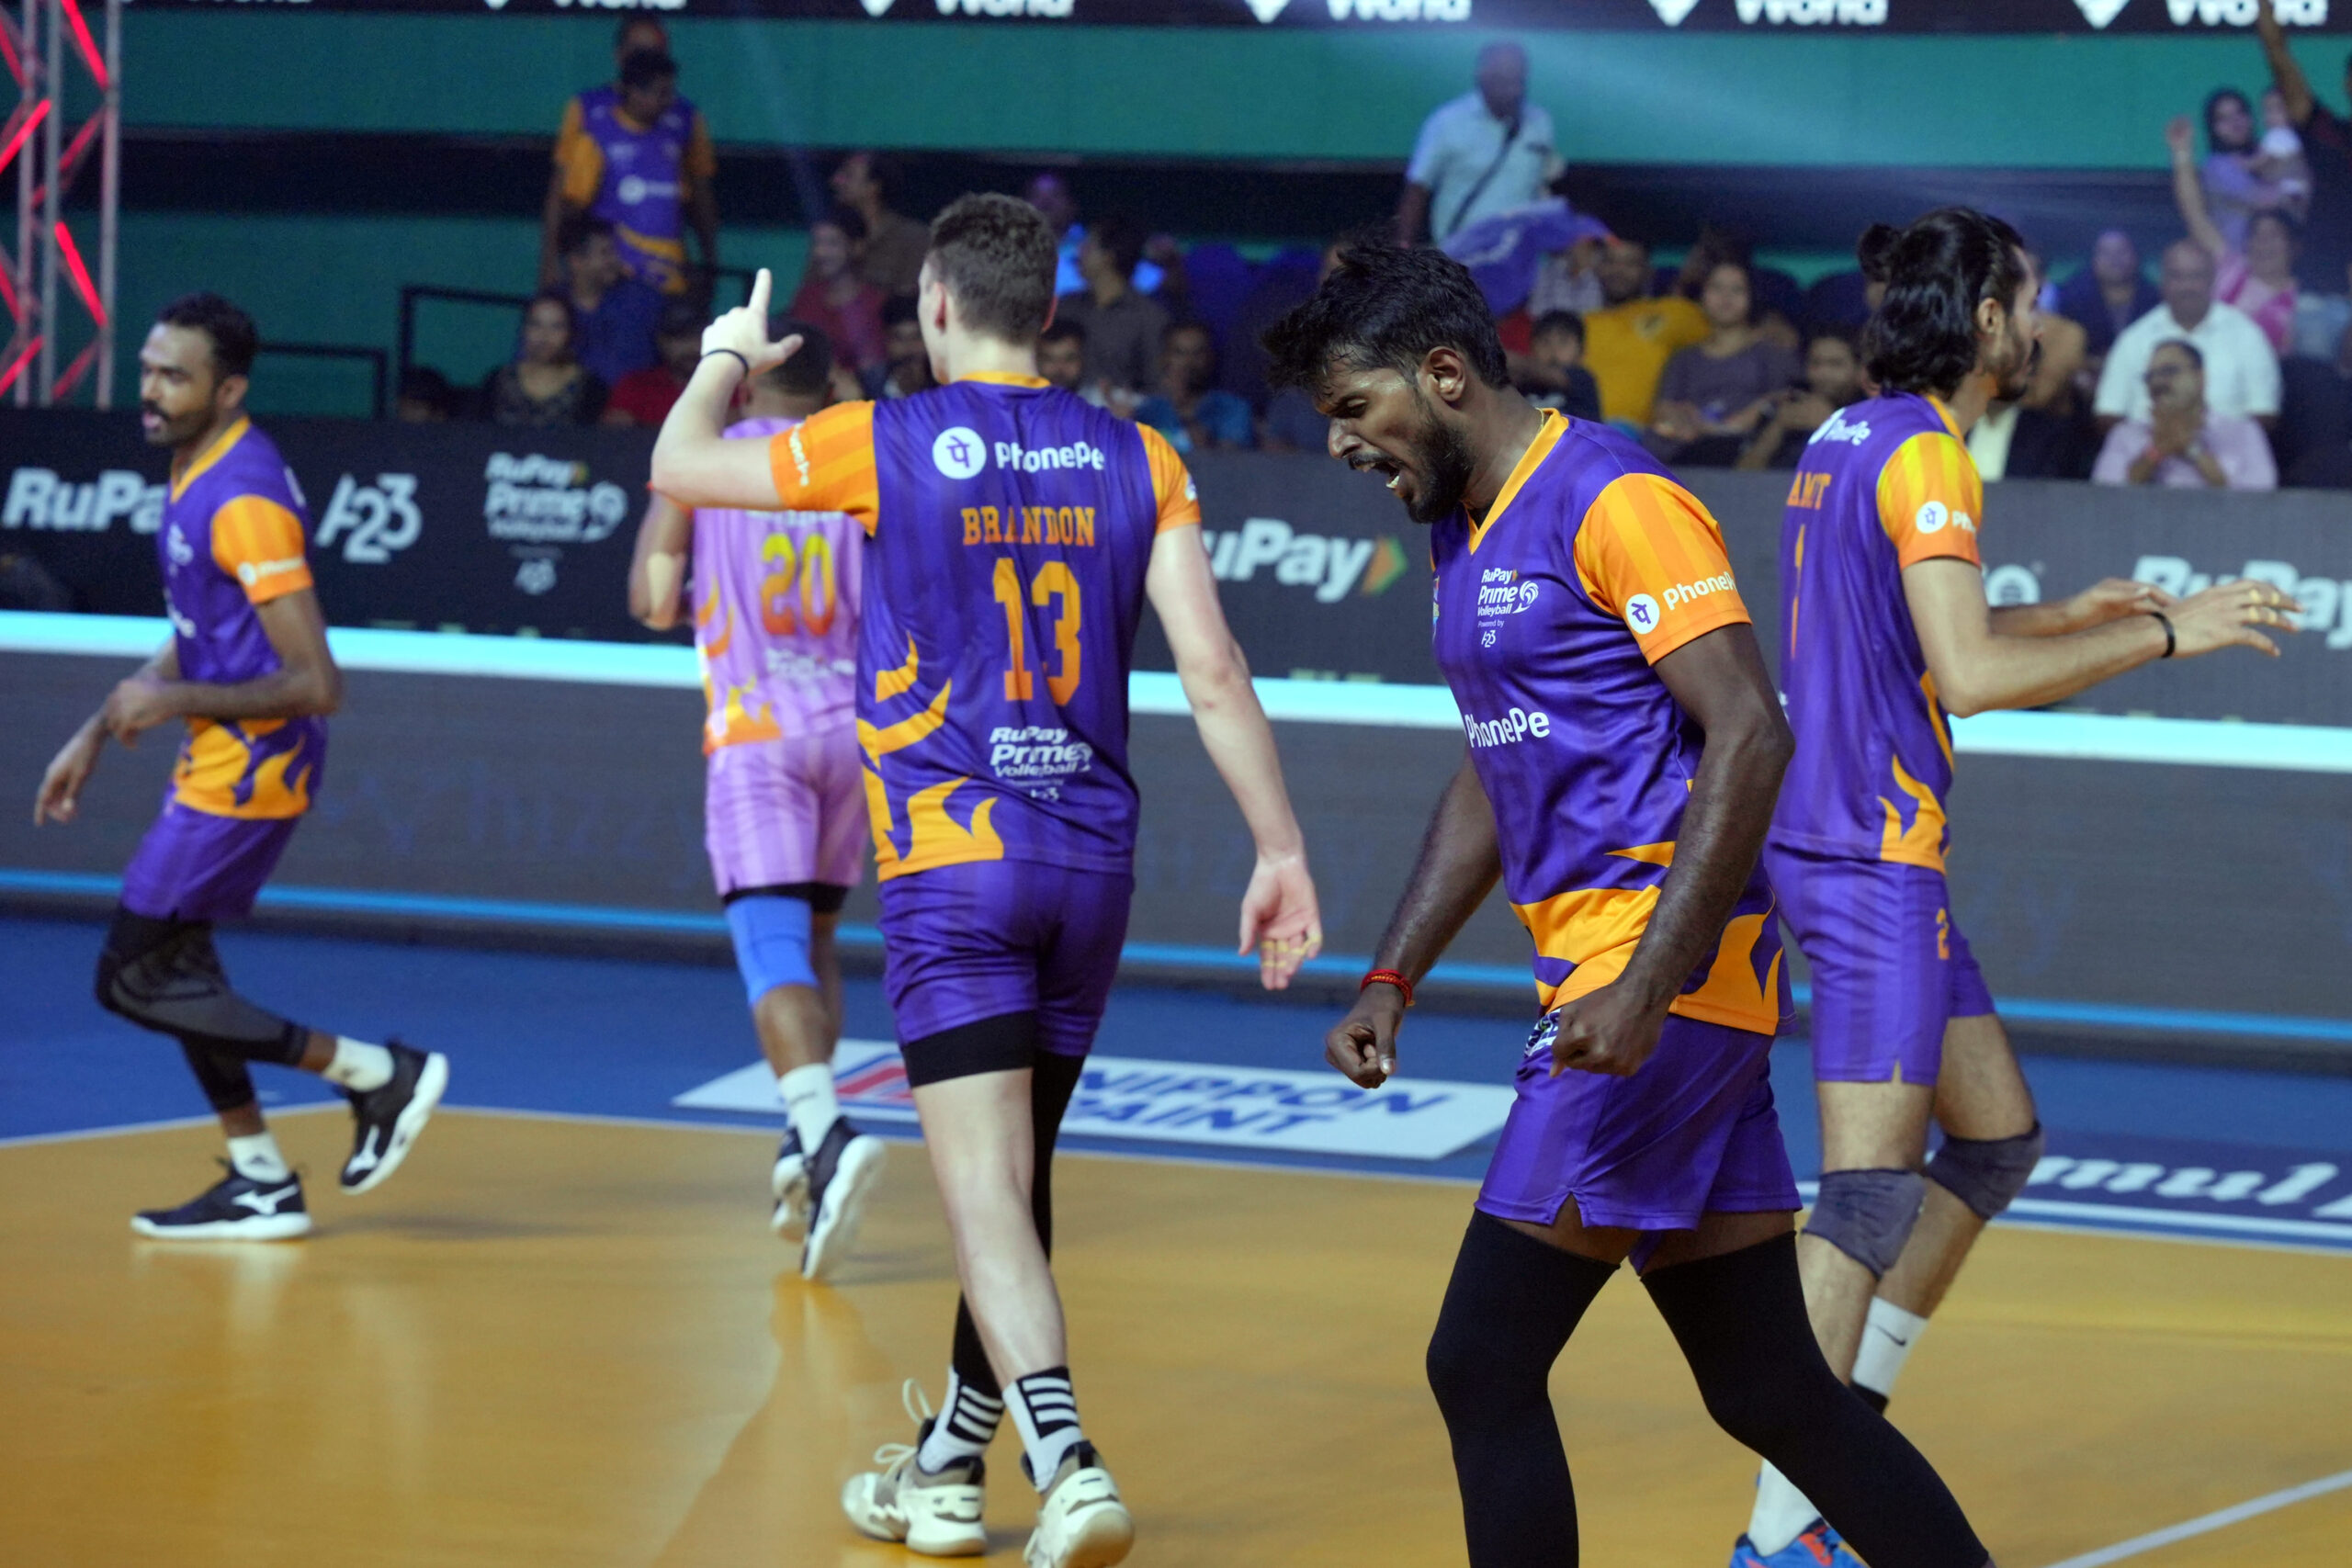 Mumbai Meteors remain in the hunt for playoffs with a win over Hyderabad Black Hawks, all you need to know about the match